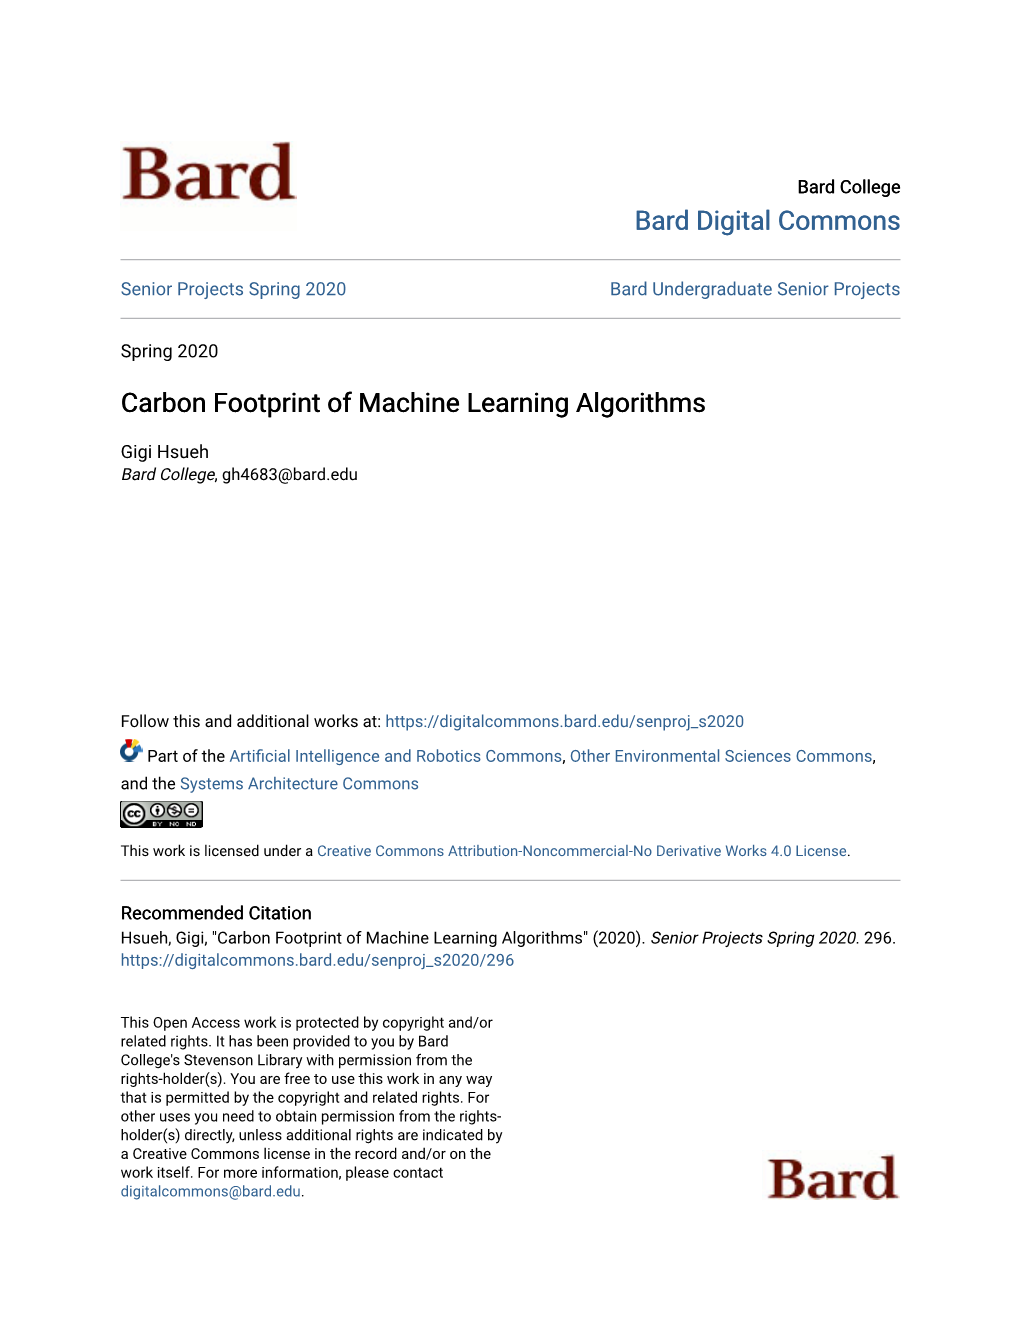 Carbon Footprint of Machine Learning Algorithms